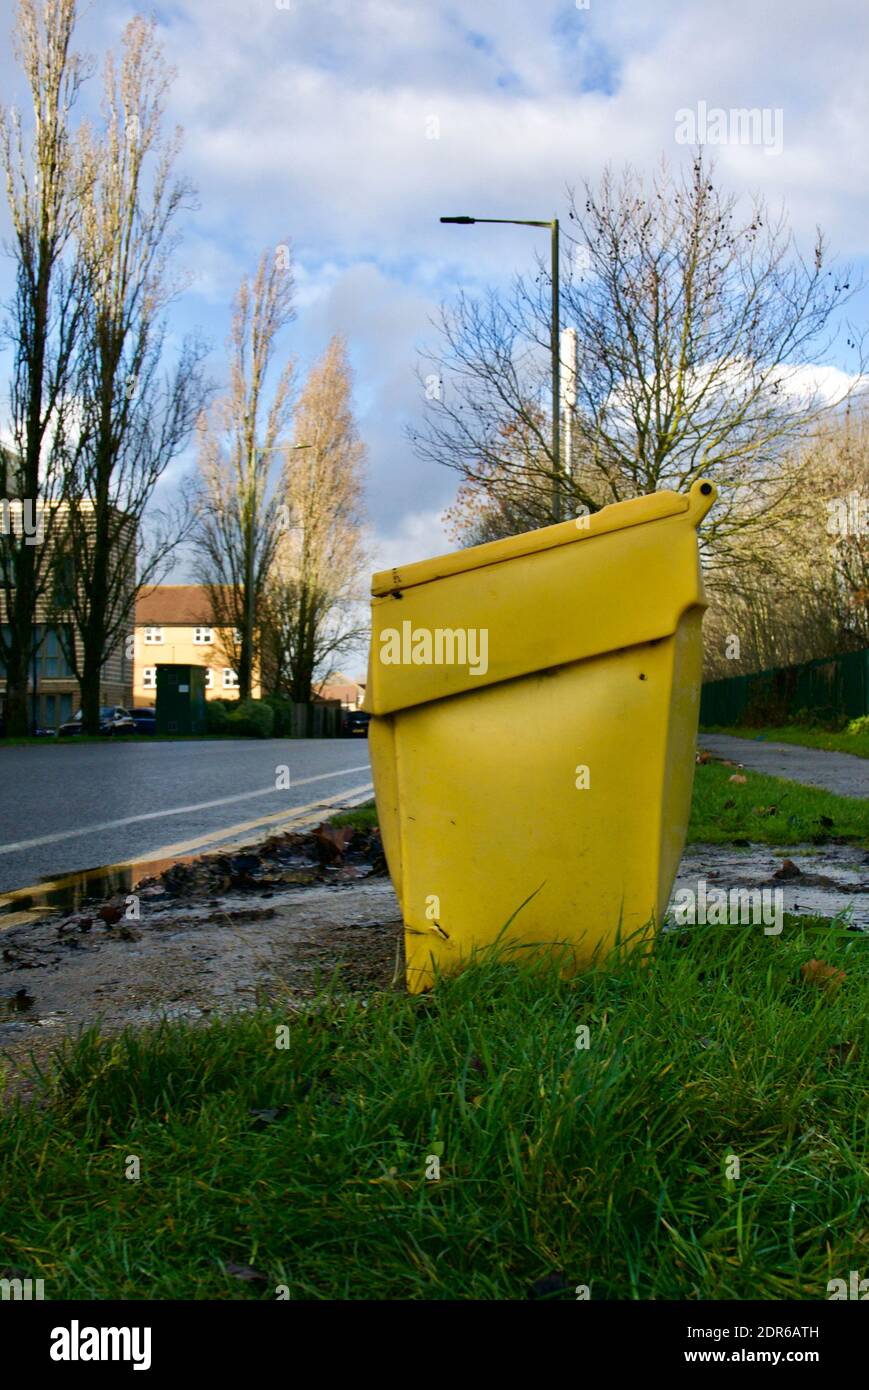 Yellow grit salt container bin side of road in Barnet, London. England often struggles to cope with cold snaps and icy roads due to salt shortage. Stock Photo